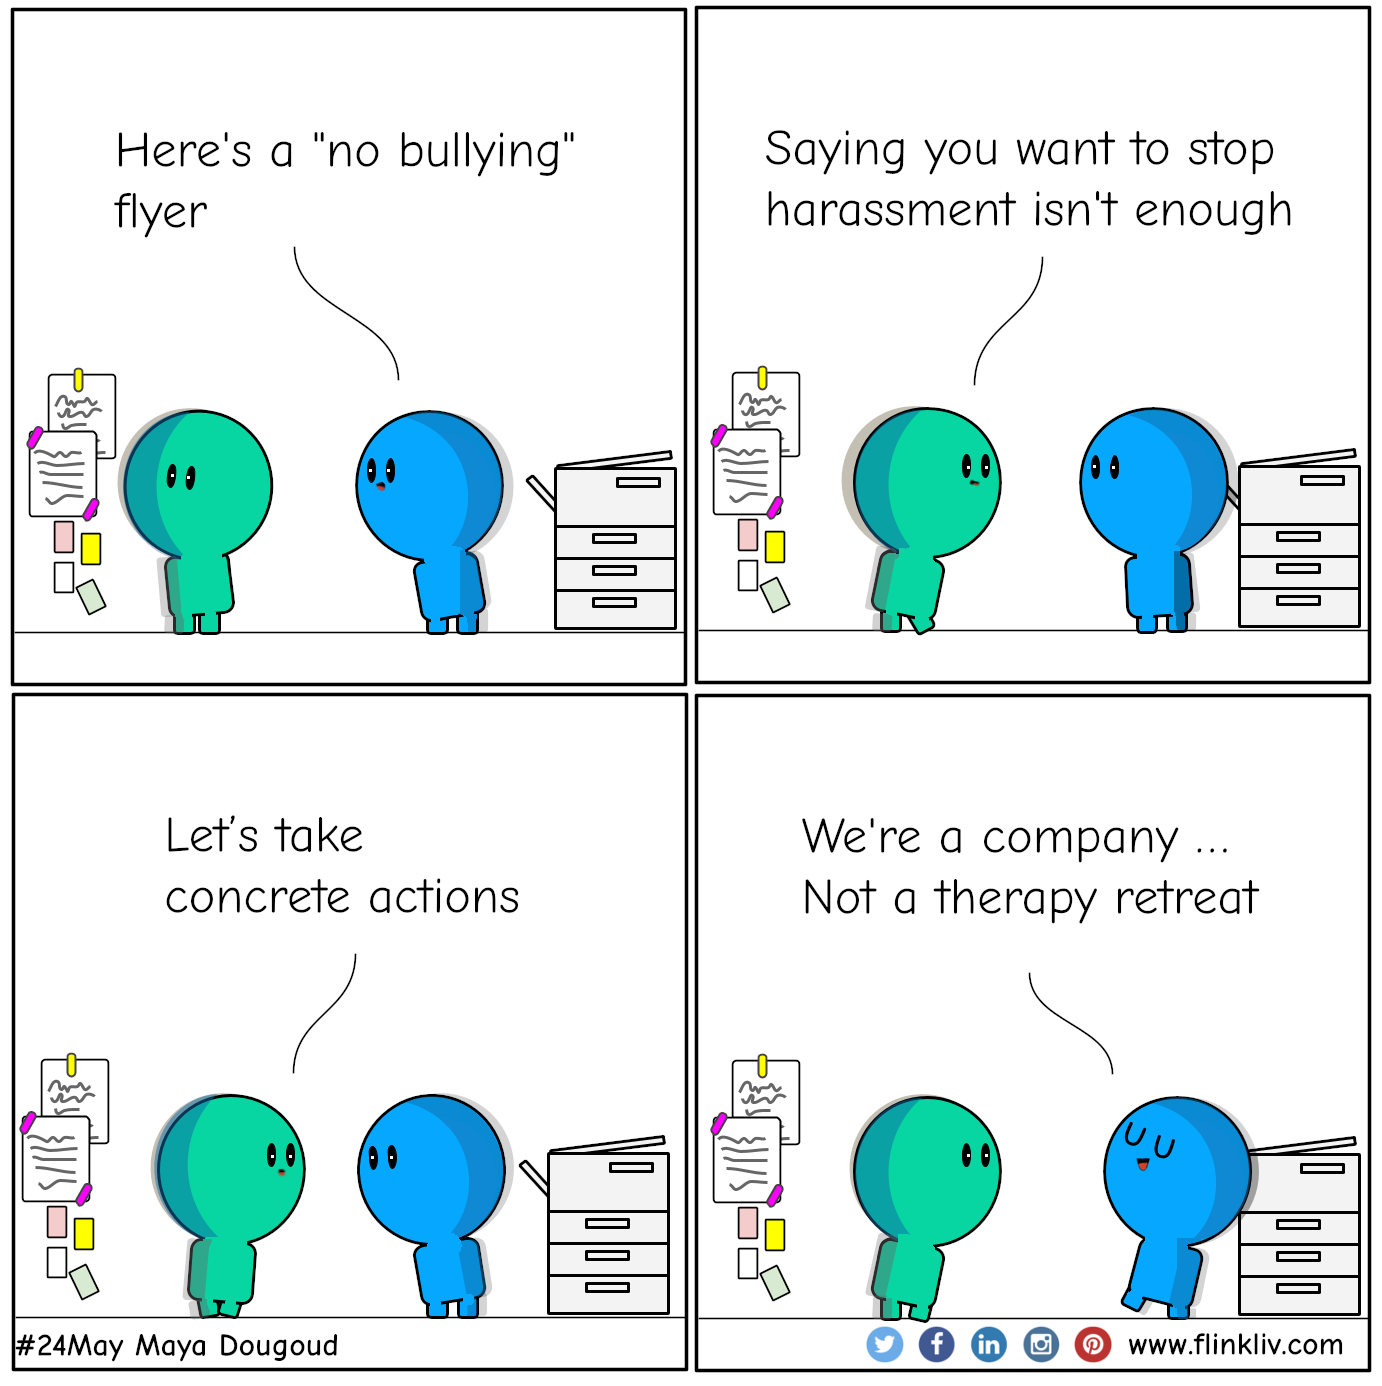 Conversation between A and B about Bullying at workplace. 
				A: Here's a no bullying flyer. 
B: Saying you want to stop harassment isn't enough. Let’s take concrete actions
A: We're a company, not a therapy retreat

				By Flinkliv.com
			